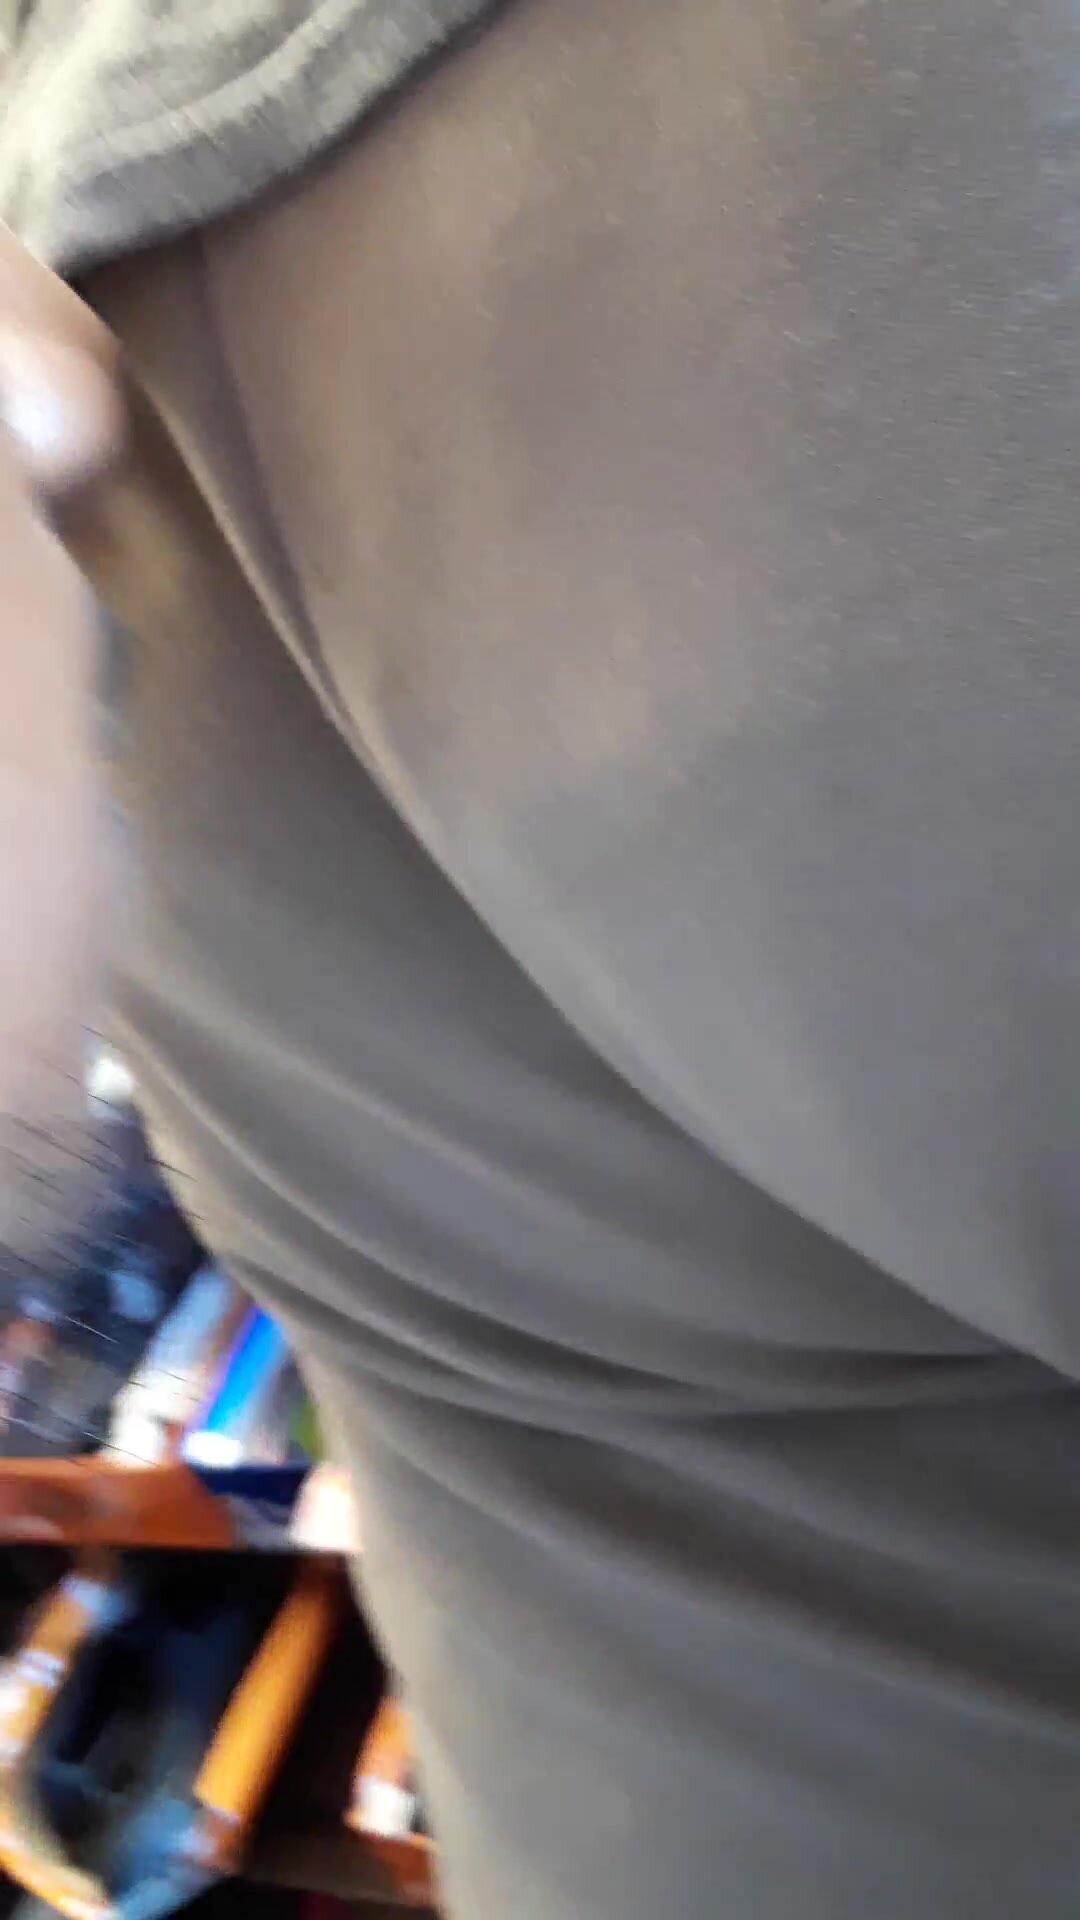 Smelling the ass of a fat man in the store